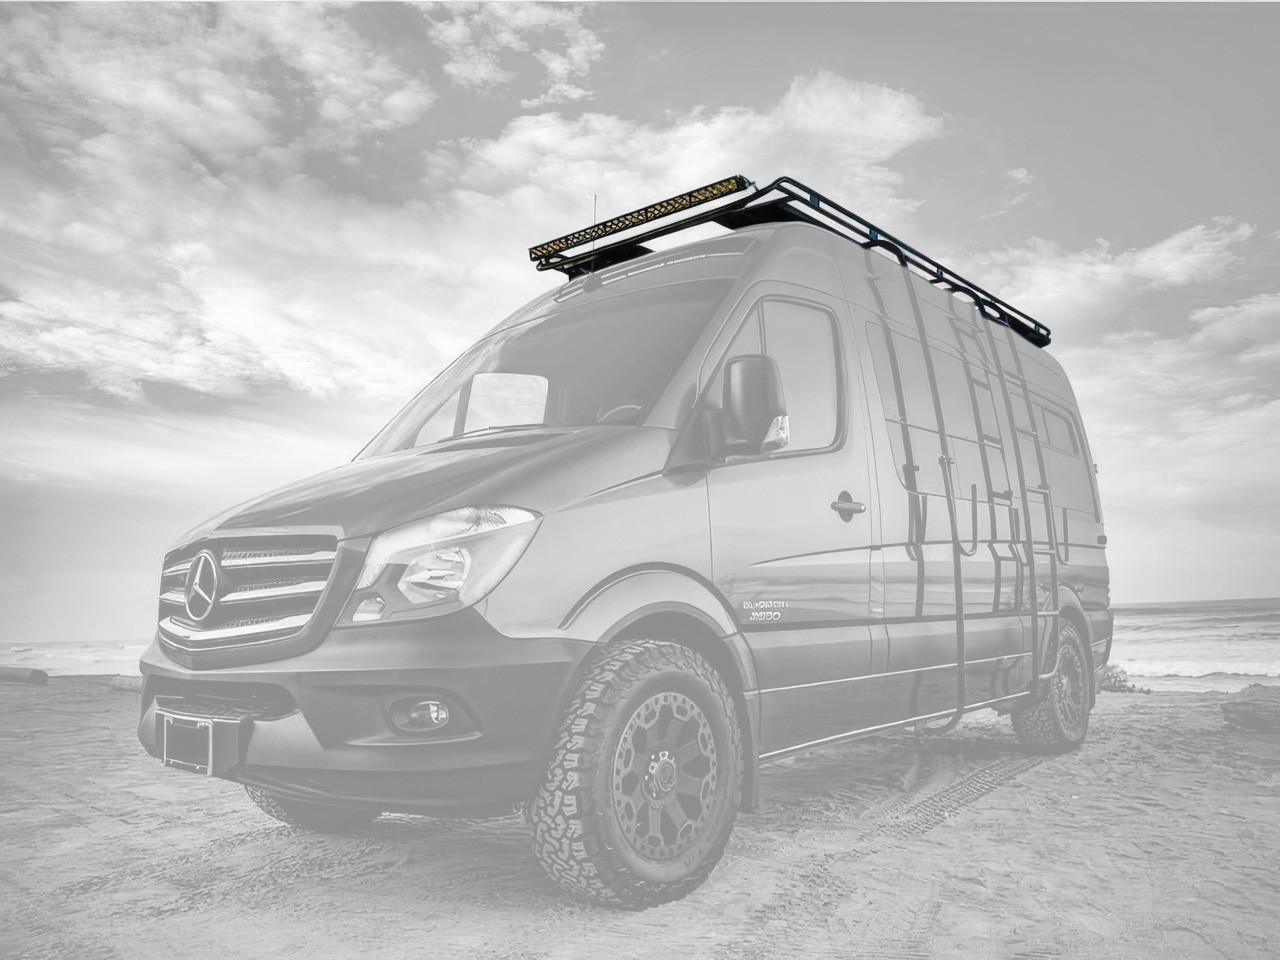 Mercedes Sprinter van parked in the desert featuring Aluminess Touring Roof Rack.